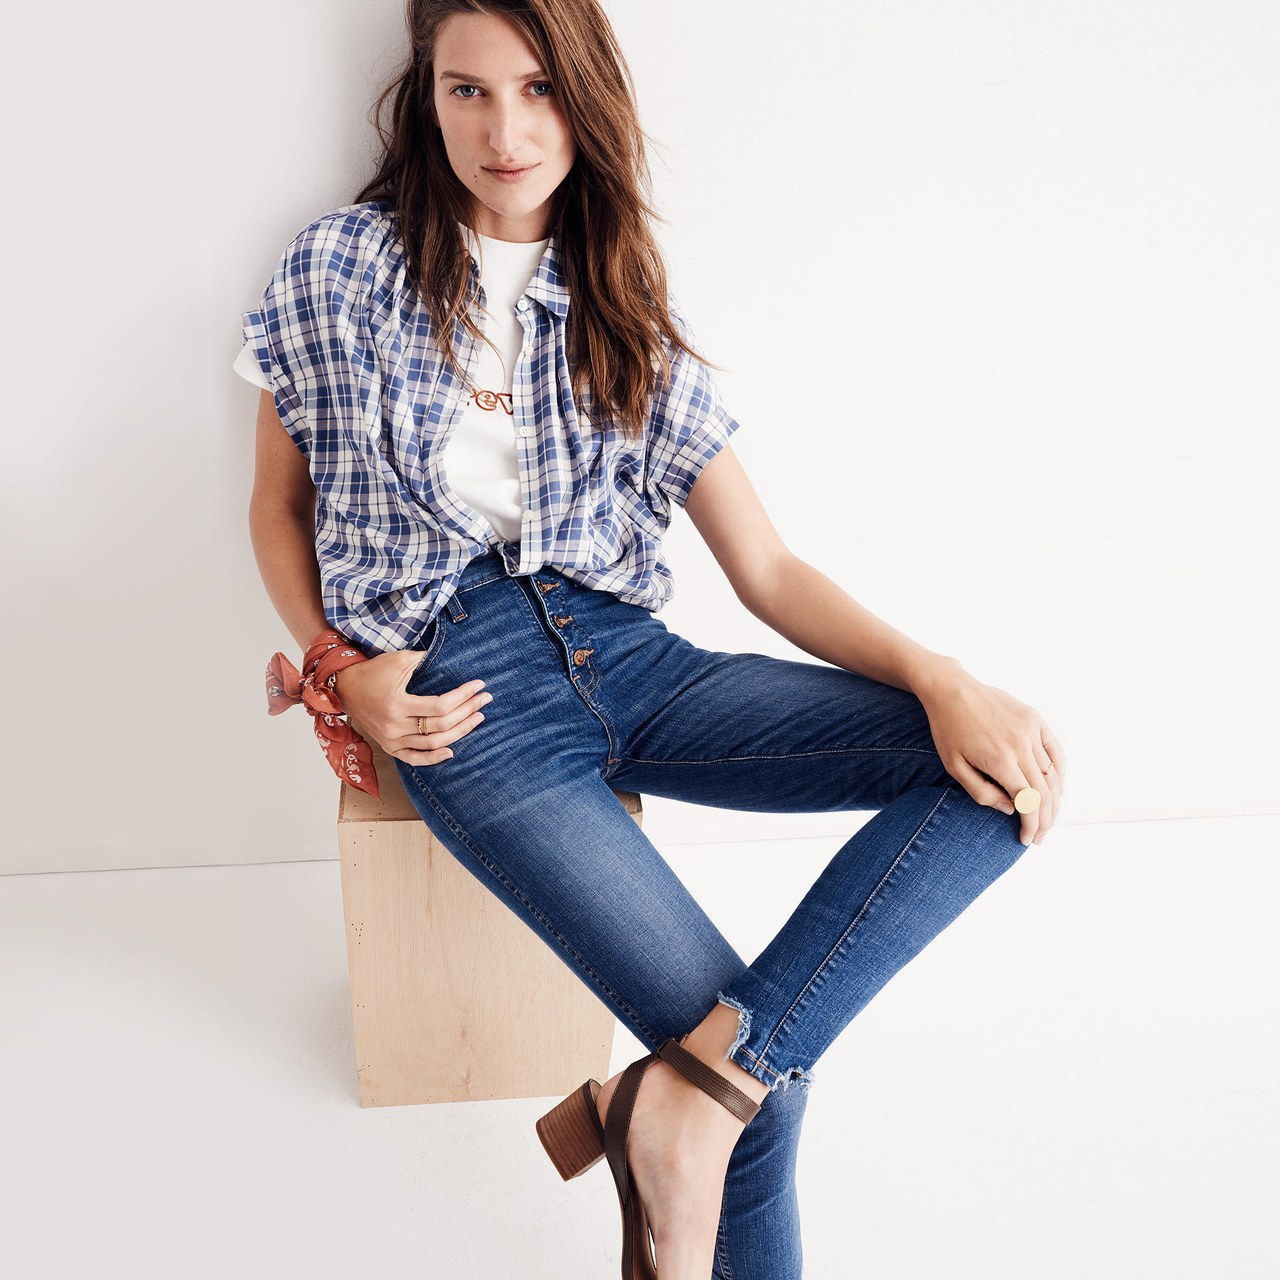 Foto: Courtesy of Madewell.